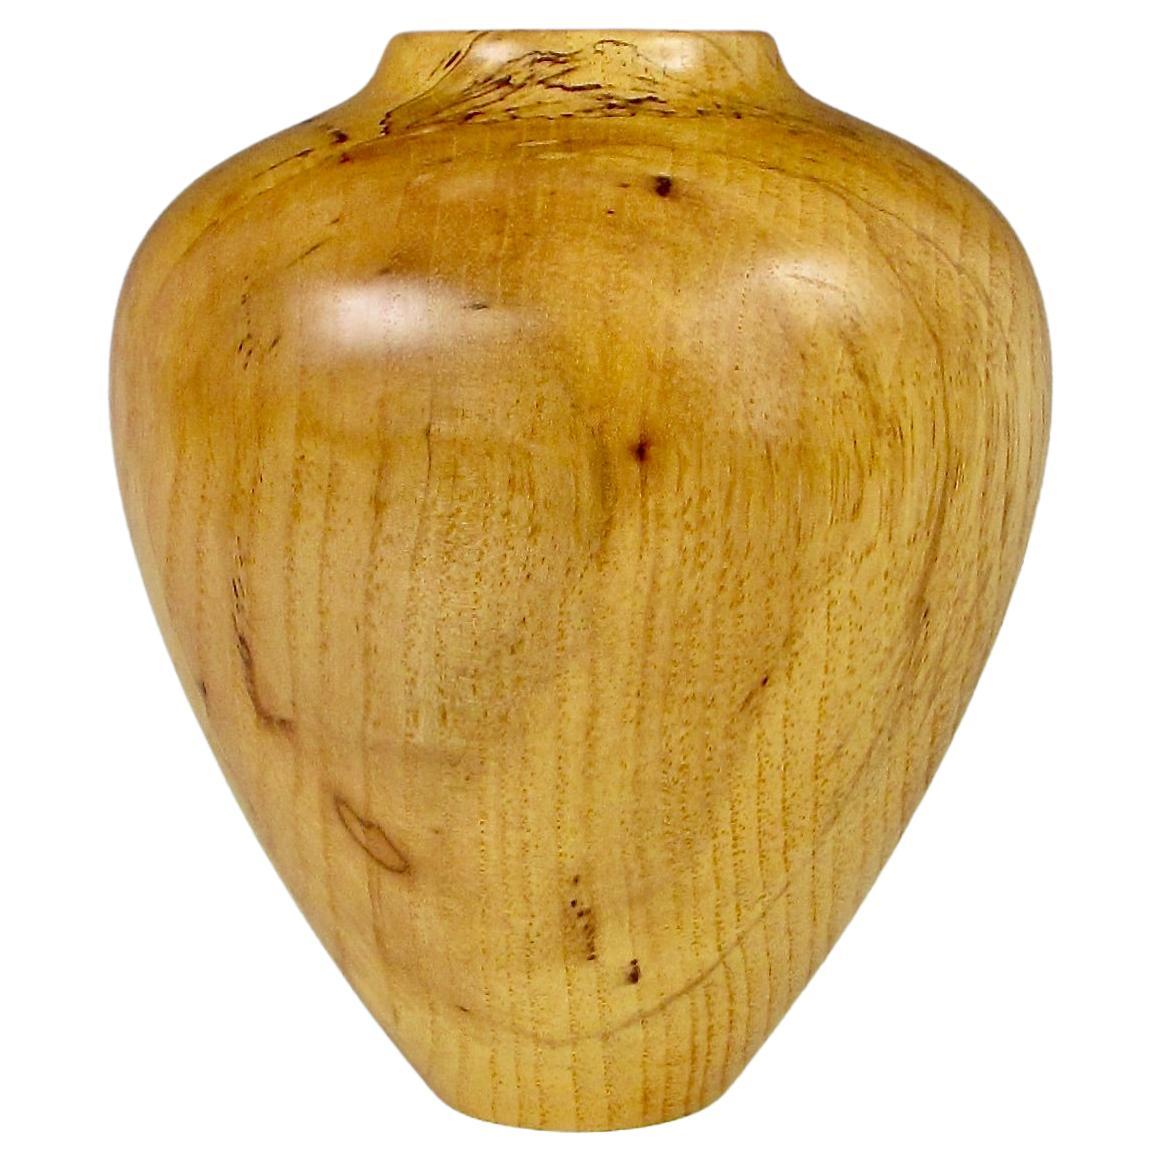 Nicely turned and crafted Blonde wood vessel . Signed on underside Alan Raelston , Spalted Pecan .